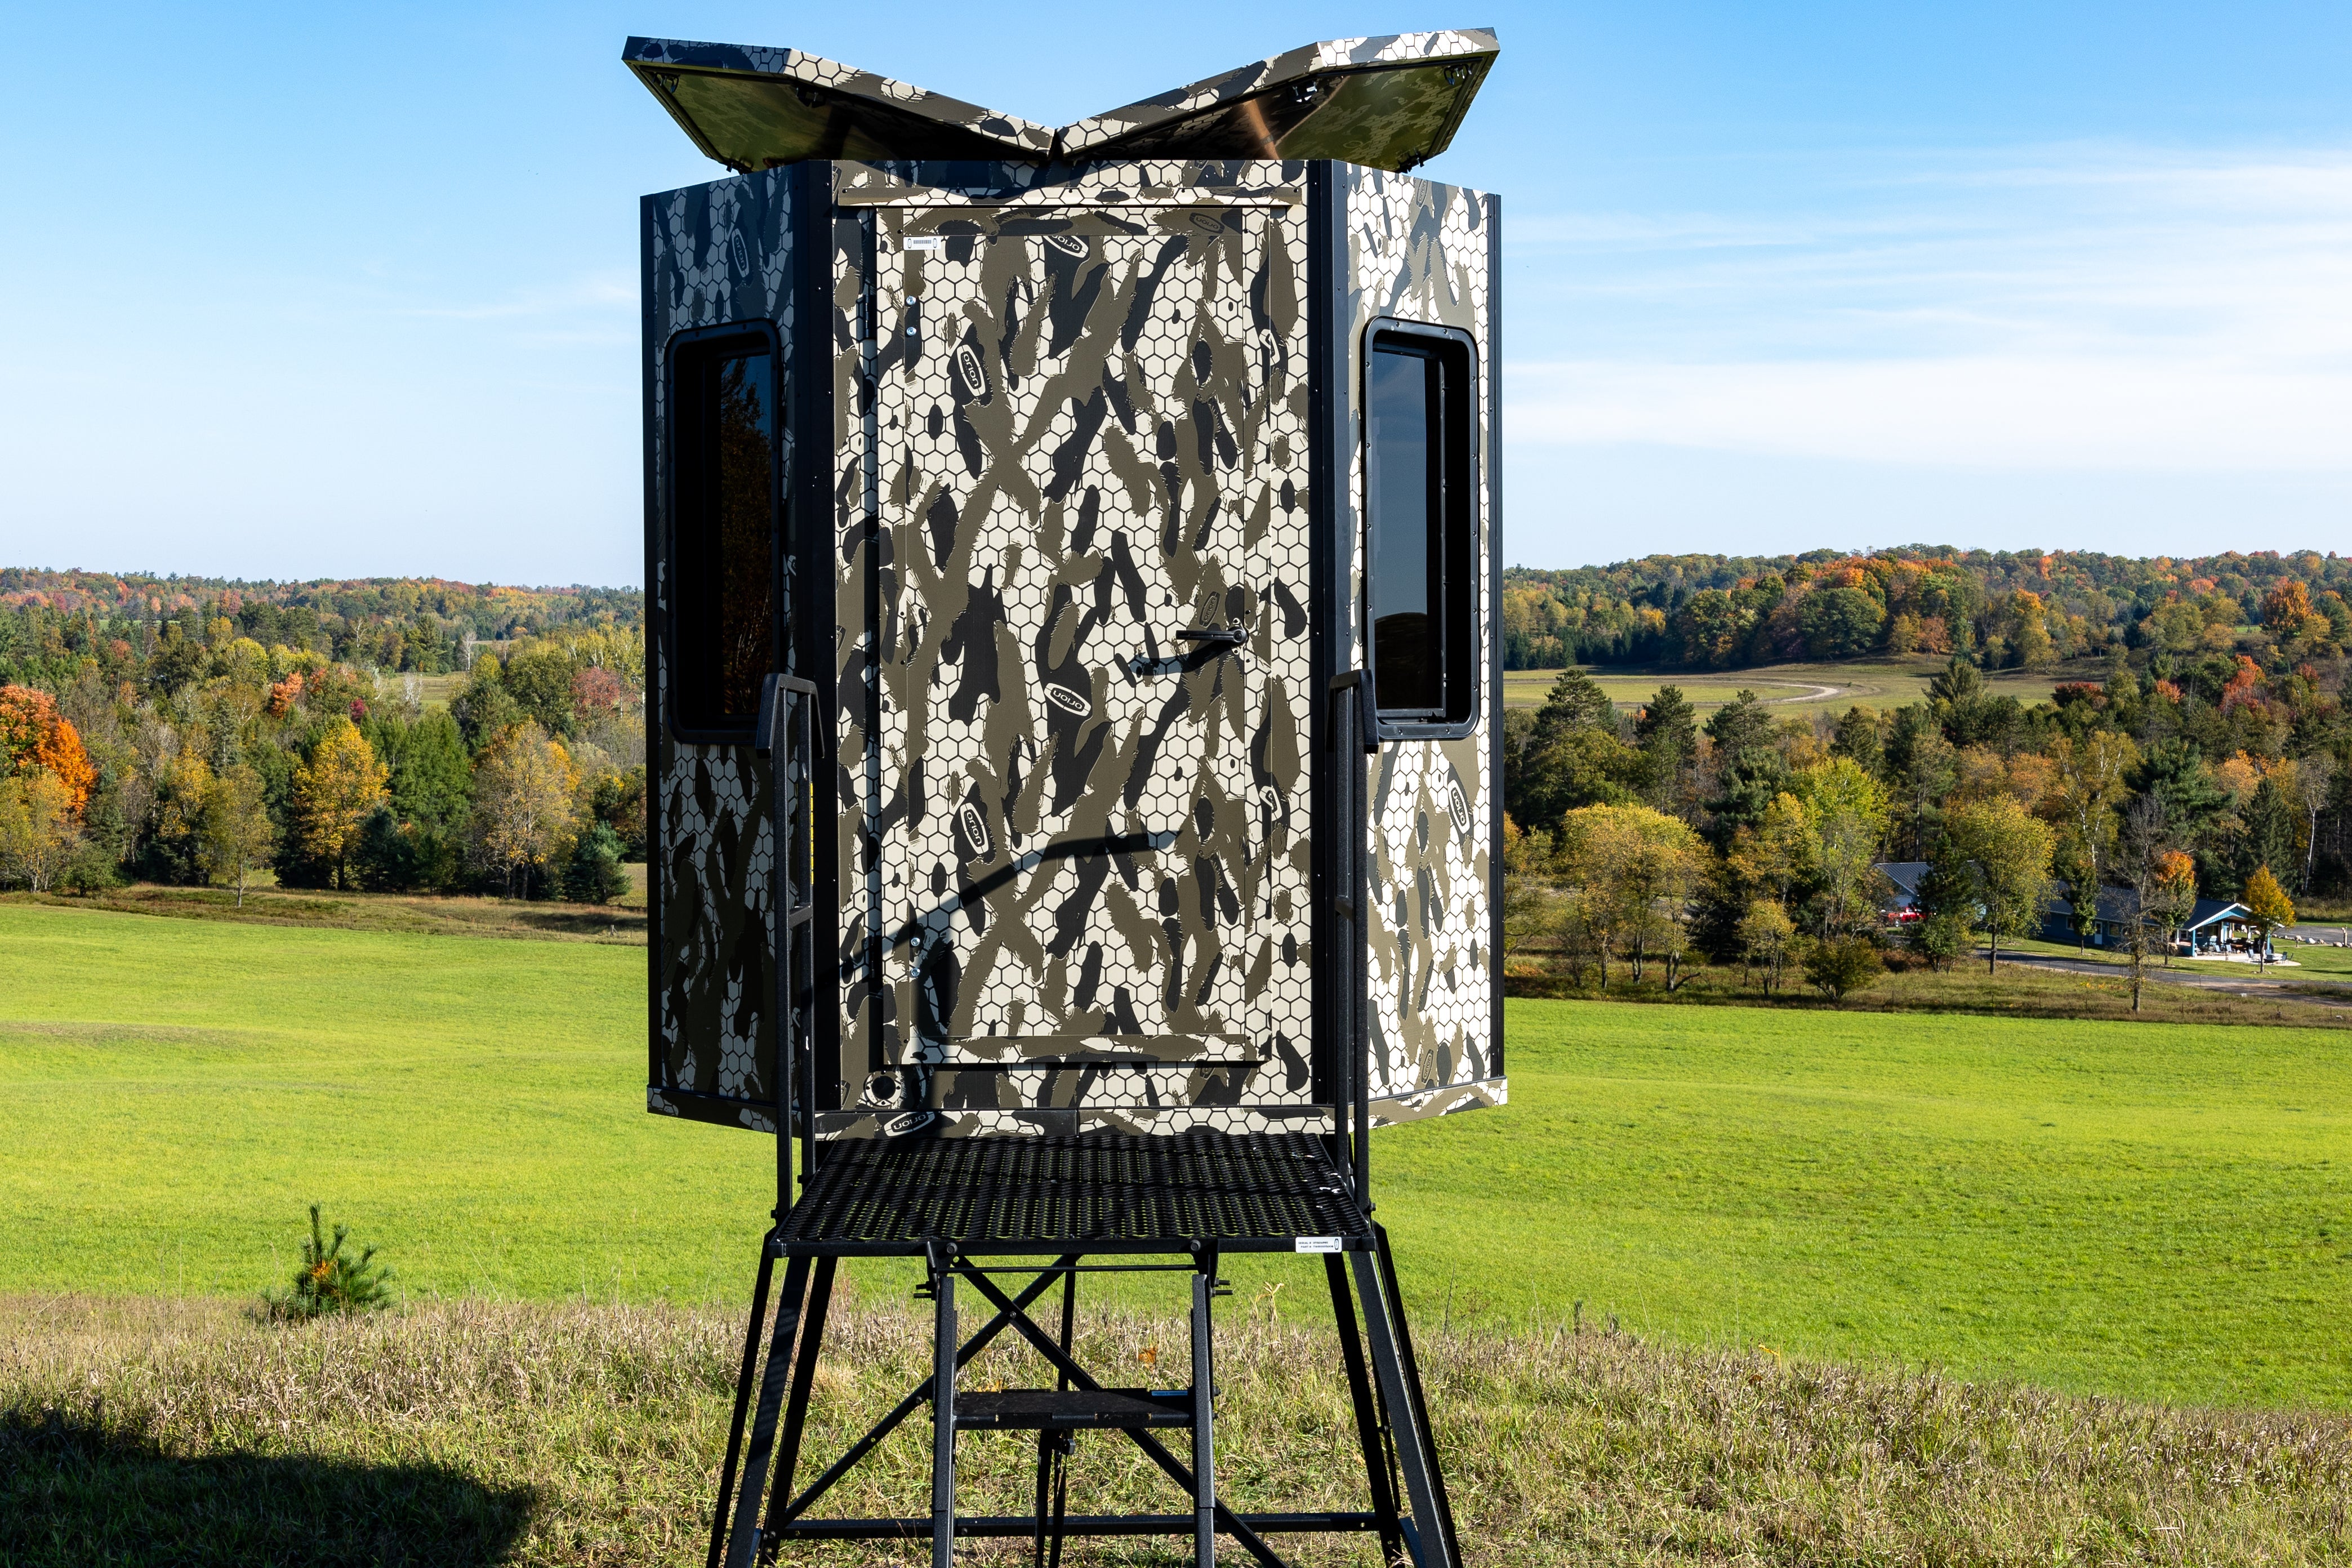 Orion 68T - Modular Deer Hunting Blind with Tinted Windows